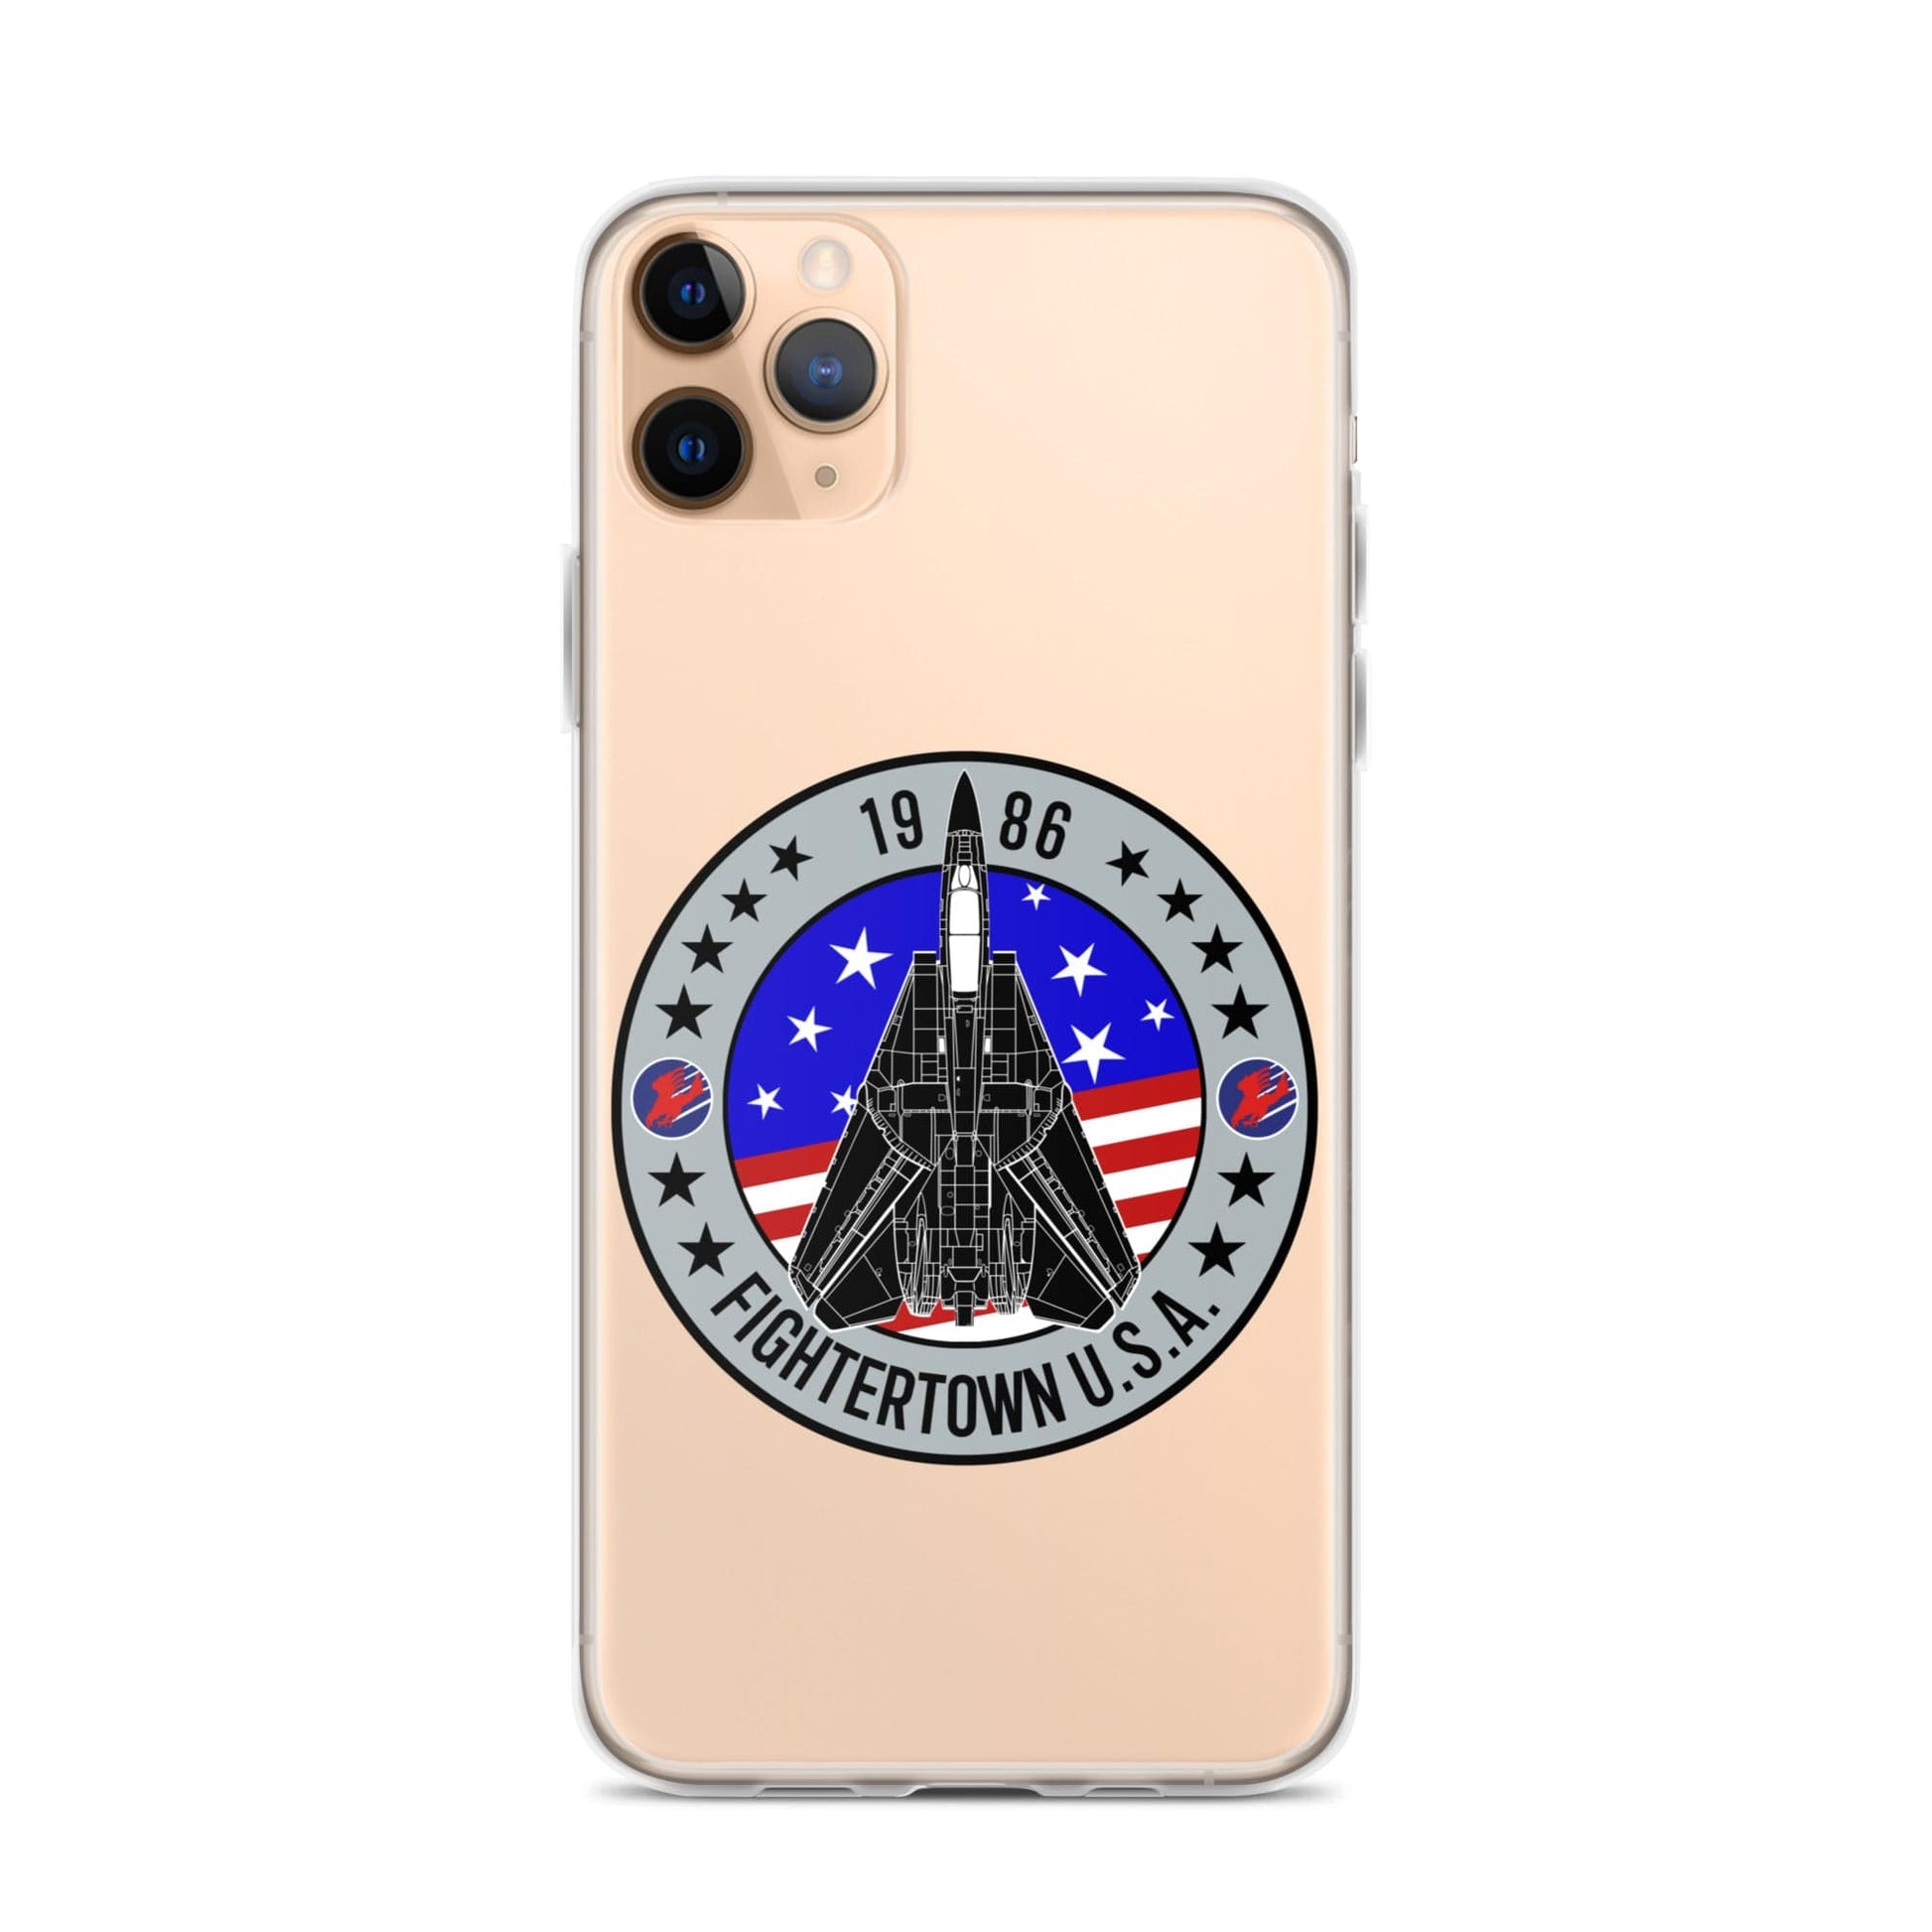 Top Gun Fans Mobile Phone Cases iPhone 11 Pro Max F-14 Tomcat Fightertown Clear iPhone Case